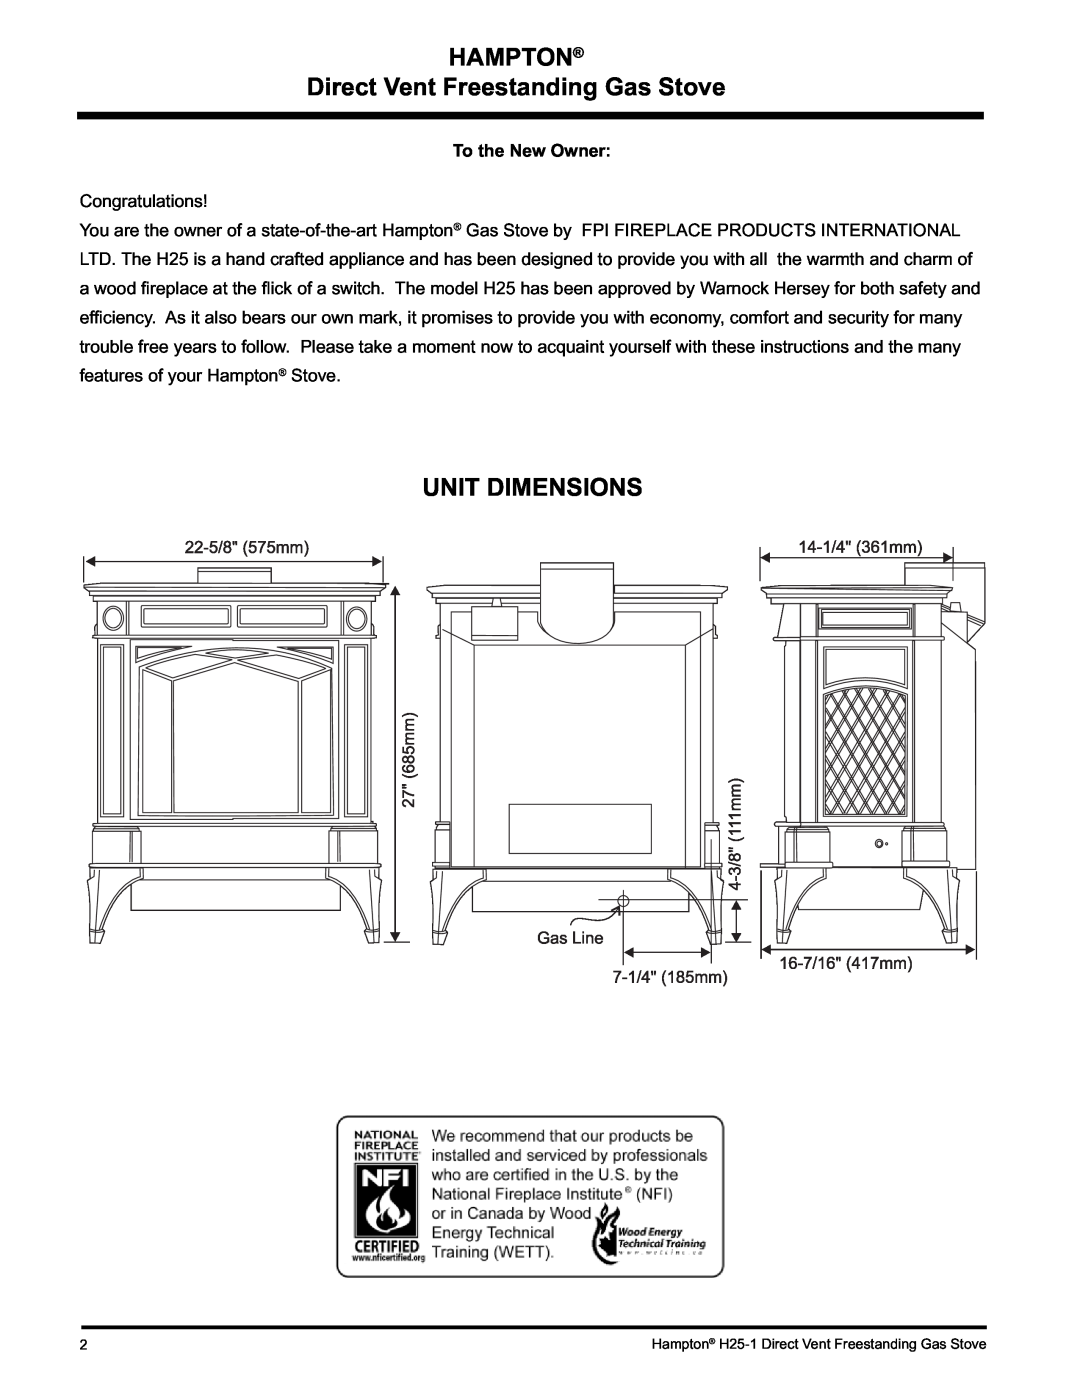 Hampton Direct H25-NG1, H25-LP1 HAMPTON Direct Vent Freestanding Gas Stove, Unit Dimensions, To the New Owner 